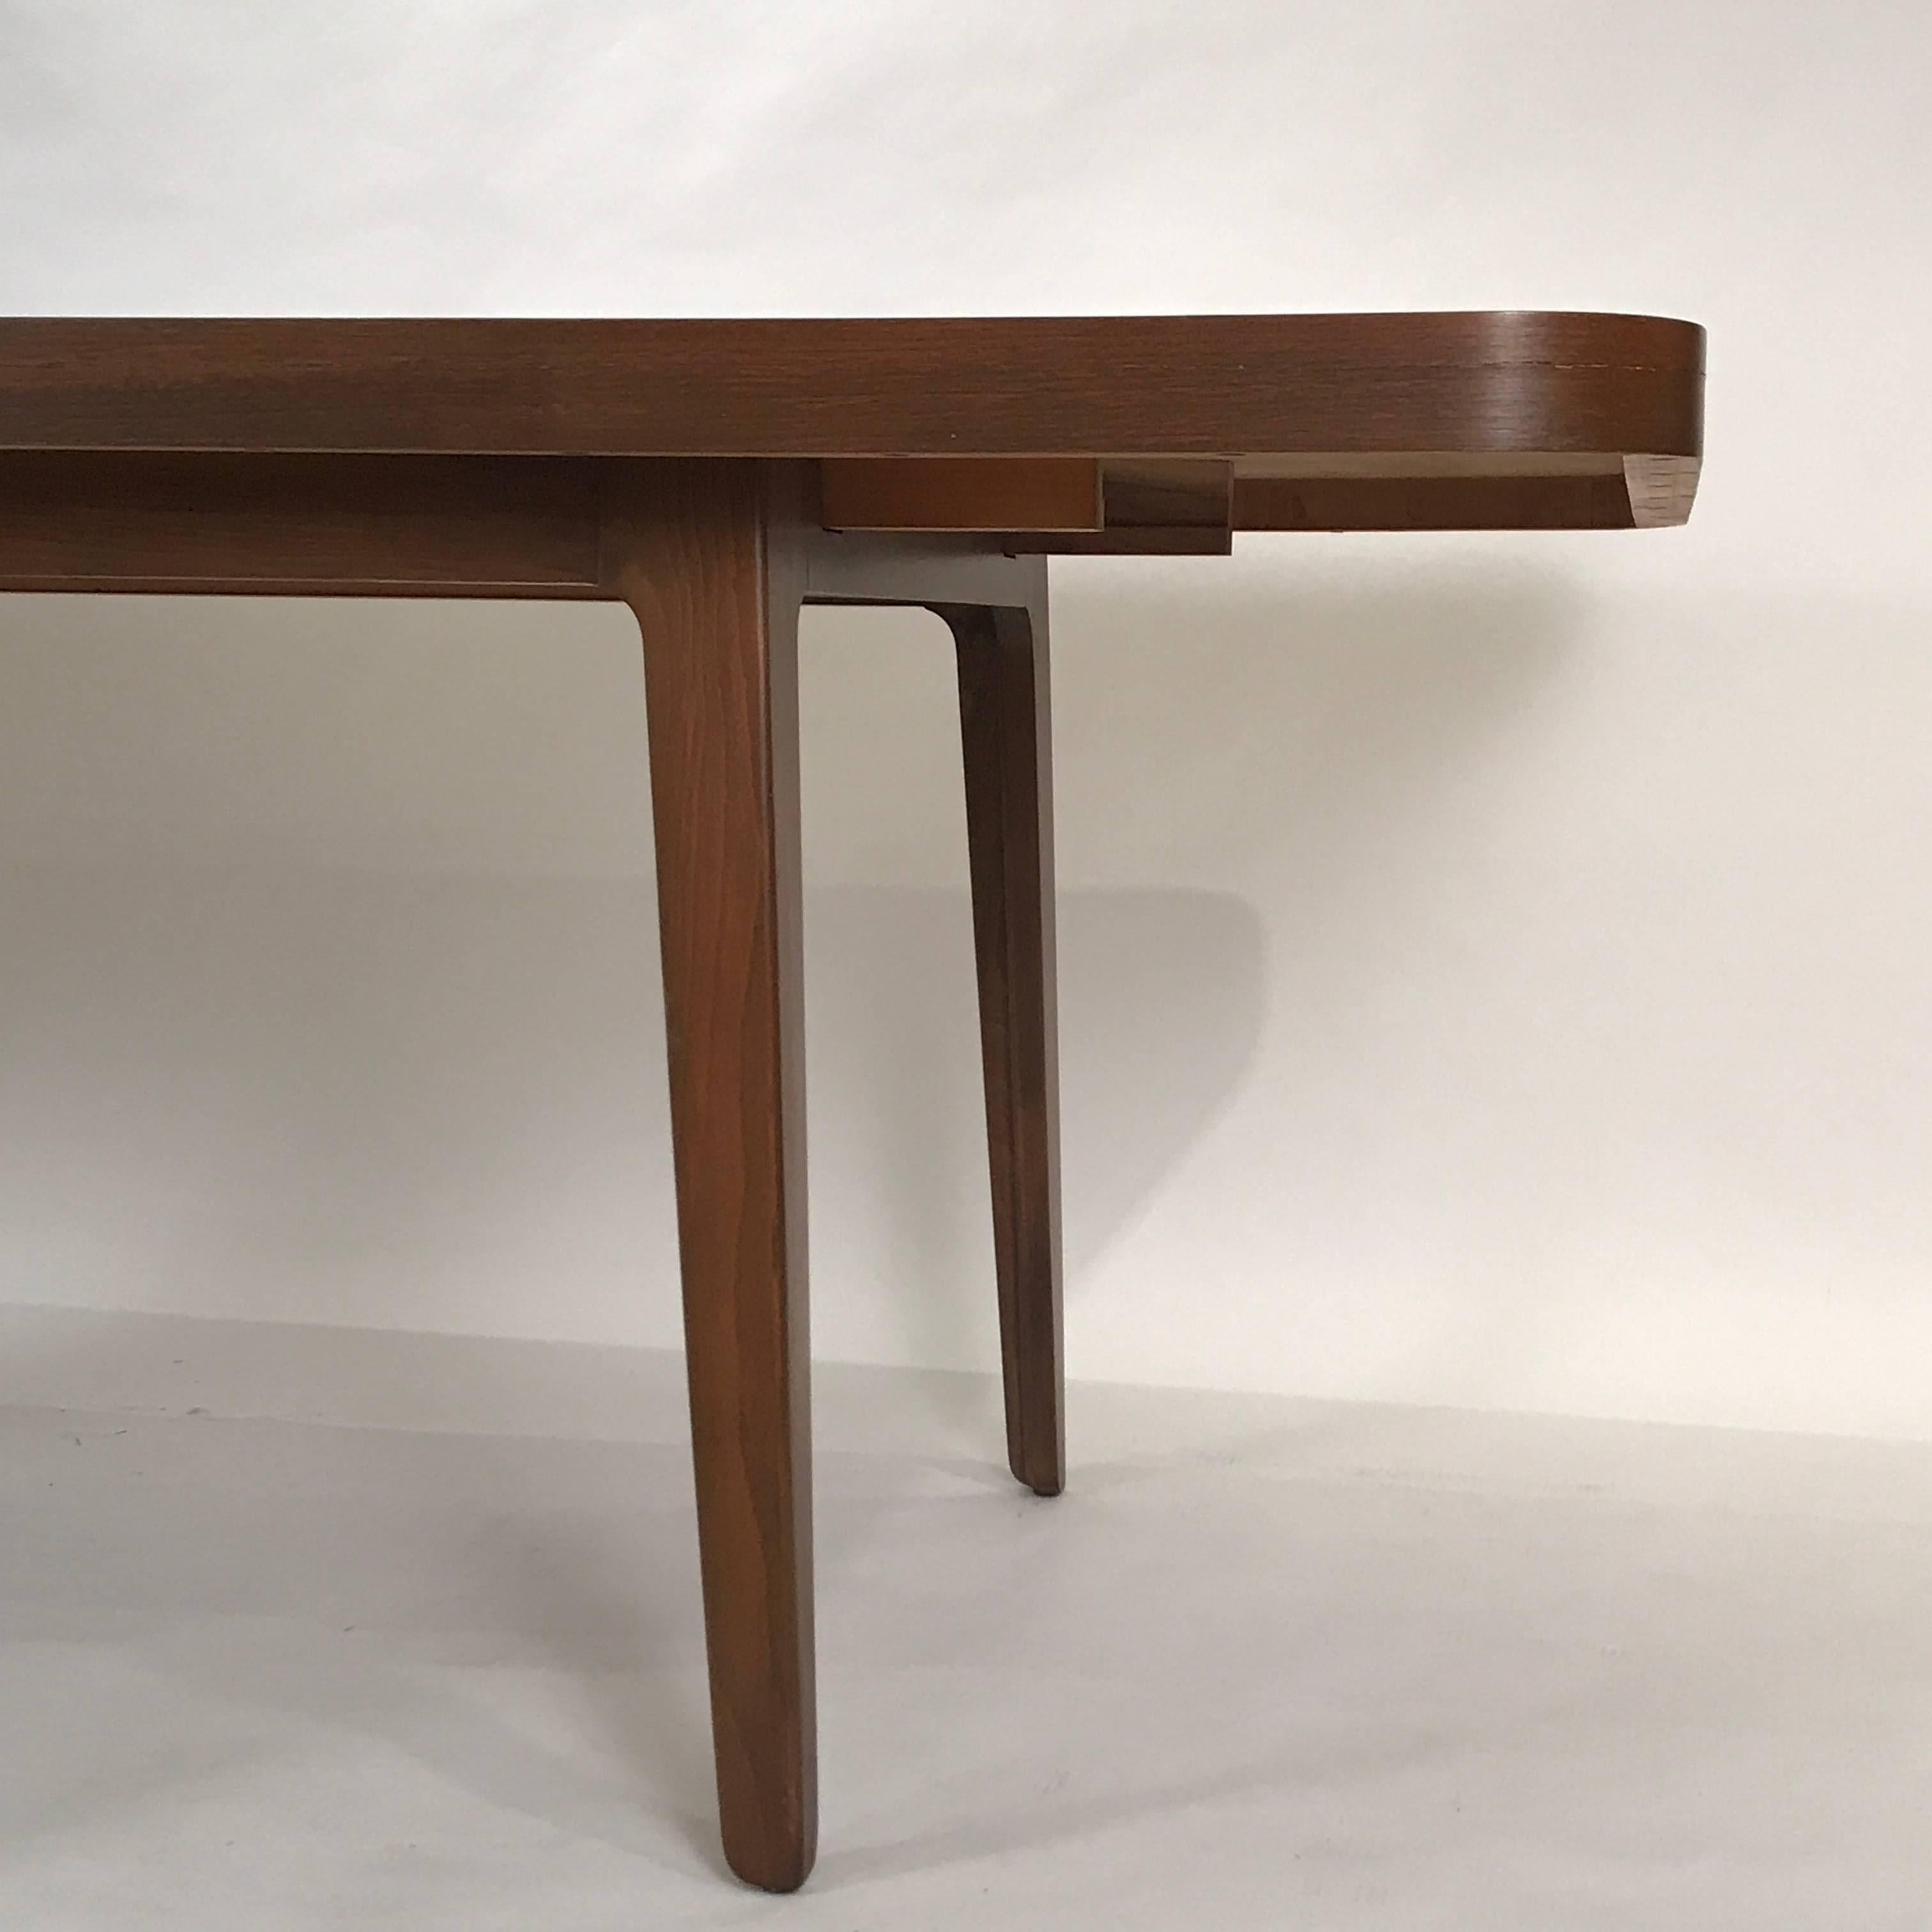 Stunning Midcentury Edward Wormley for Drexel Walnut Extension Dining Table 1